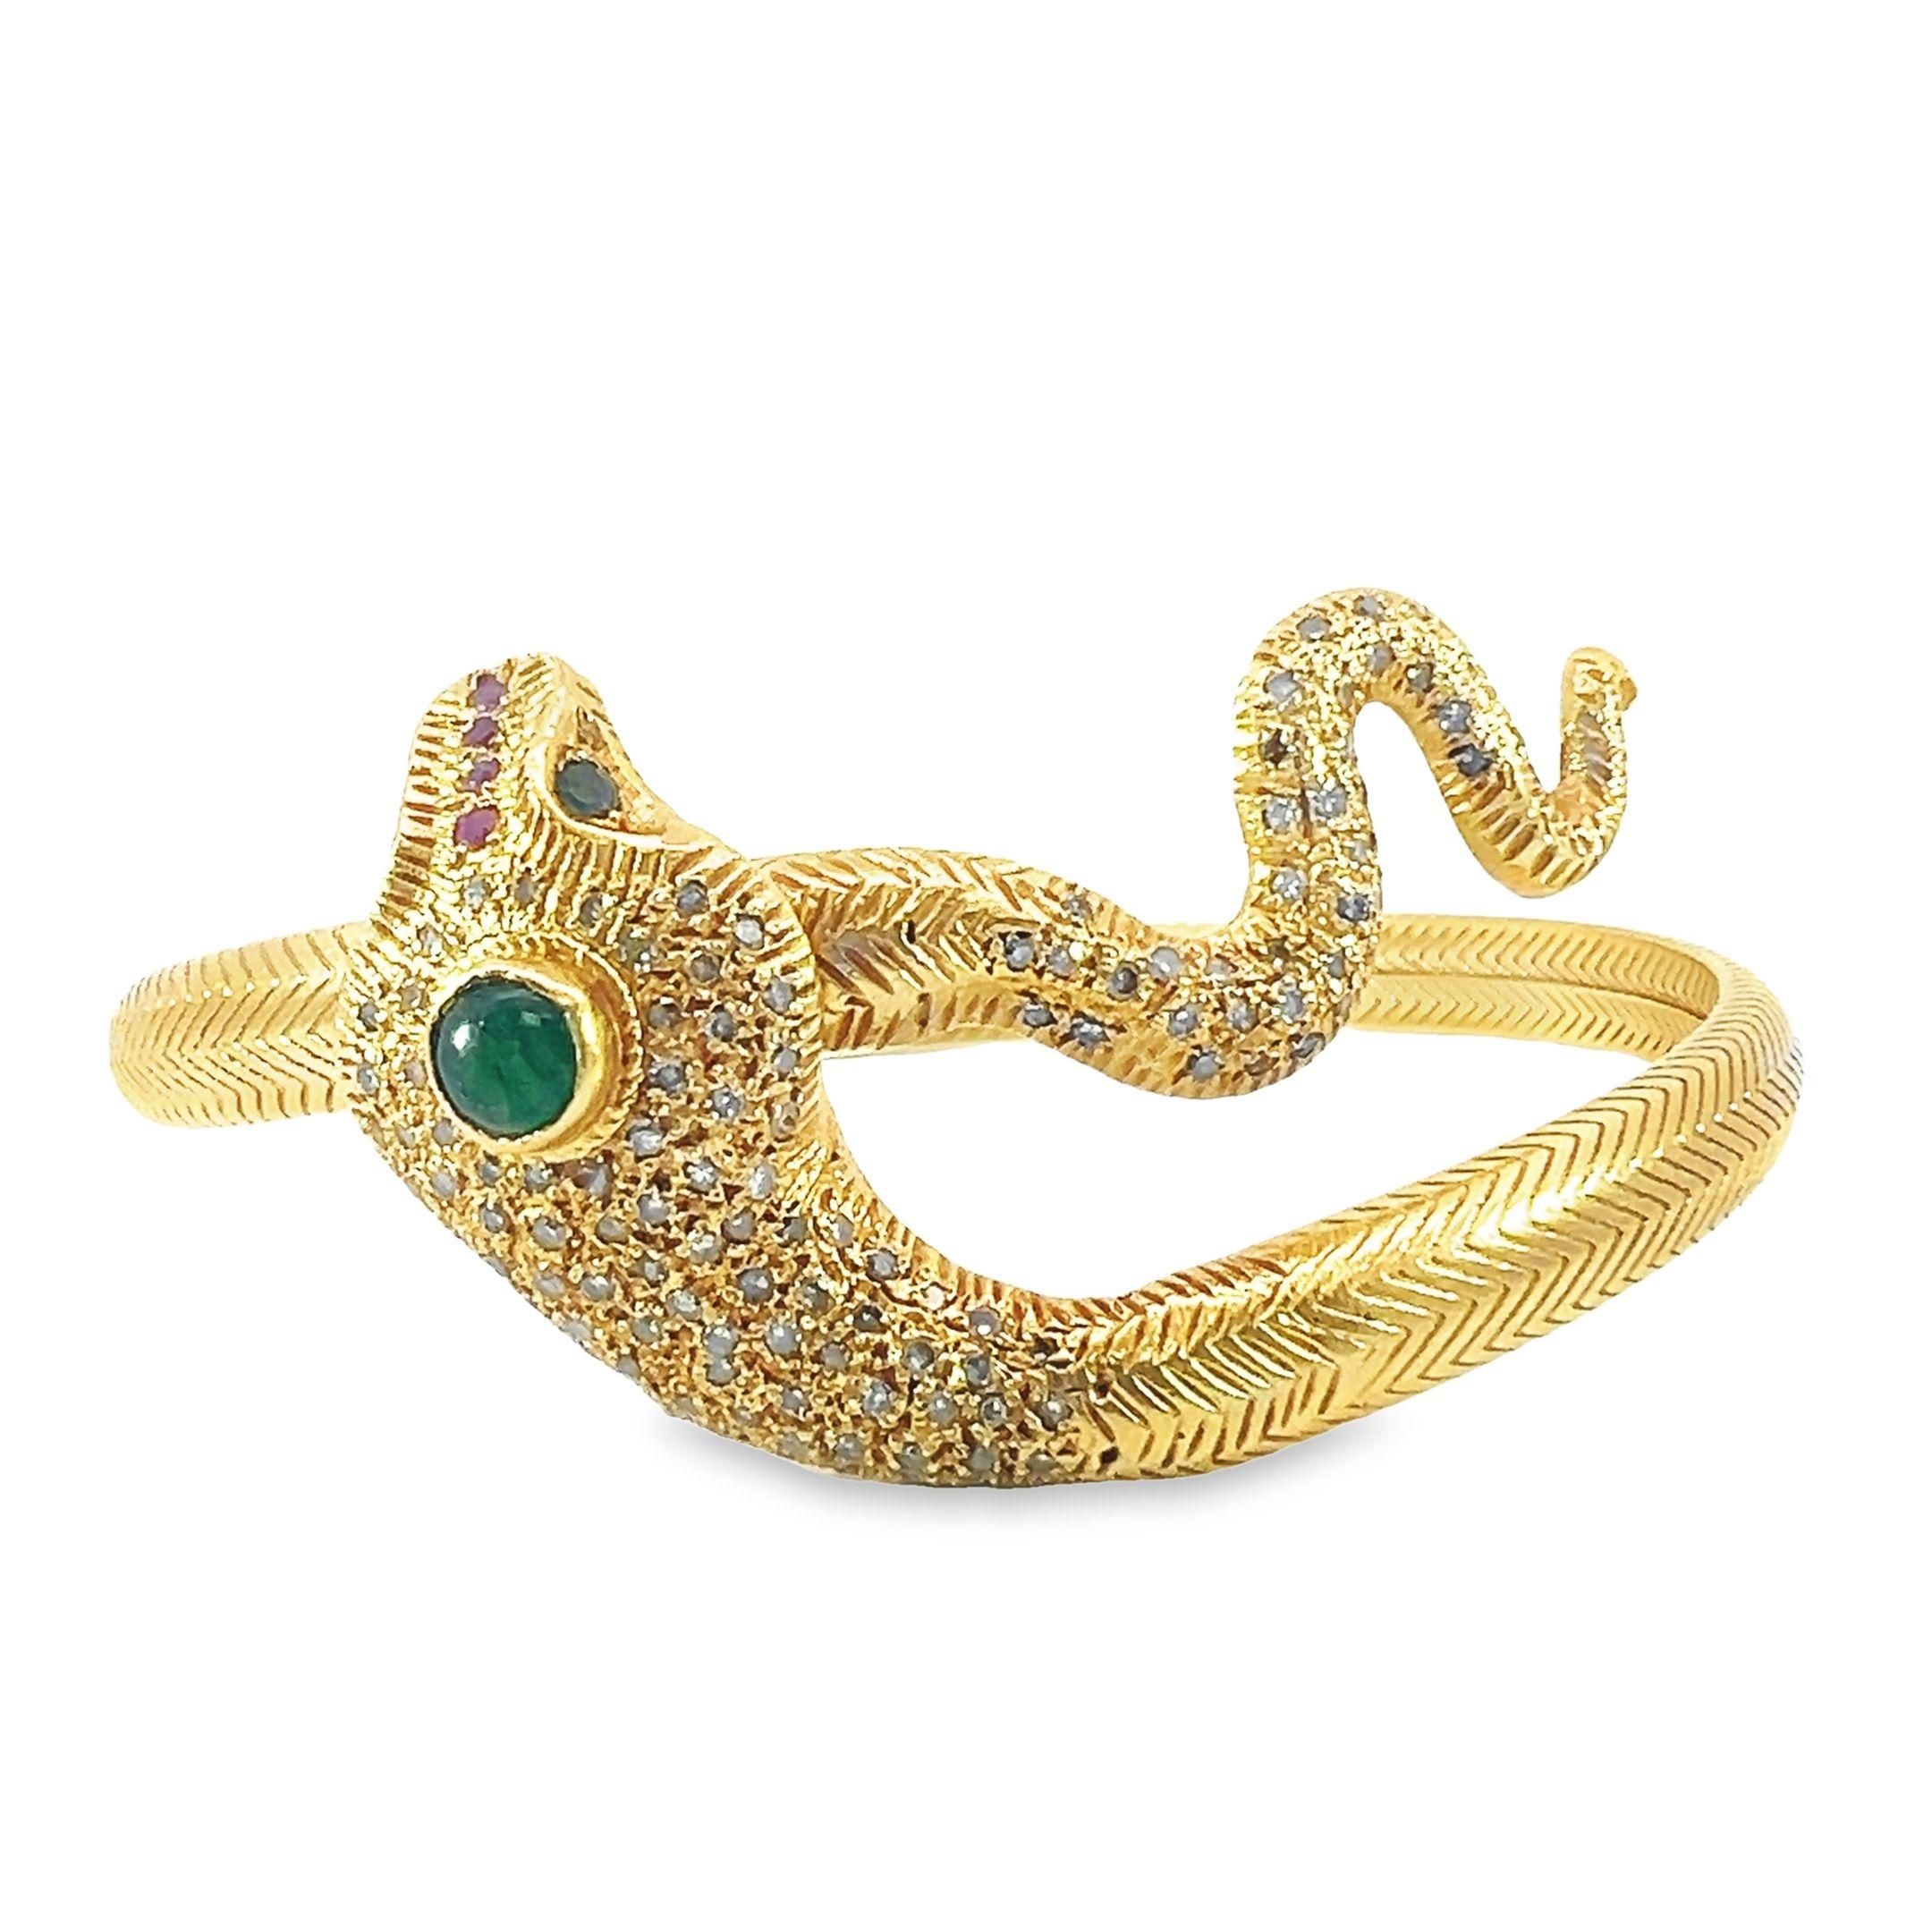 A beautiful 18-karat solid gold serpent bangle made with natural 2.30-carat diamonds, 0.45-carat-emeralds and 0.04-carat ruby.  It's eyes set with mesmerizing emerald stones to captivate any onlooker. 
